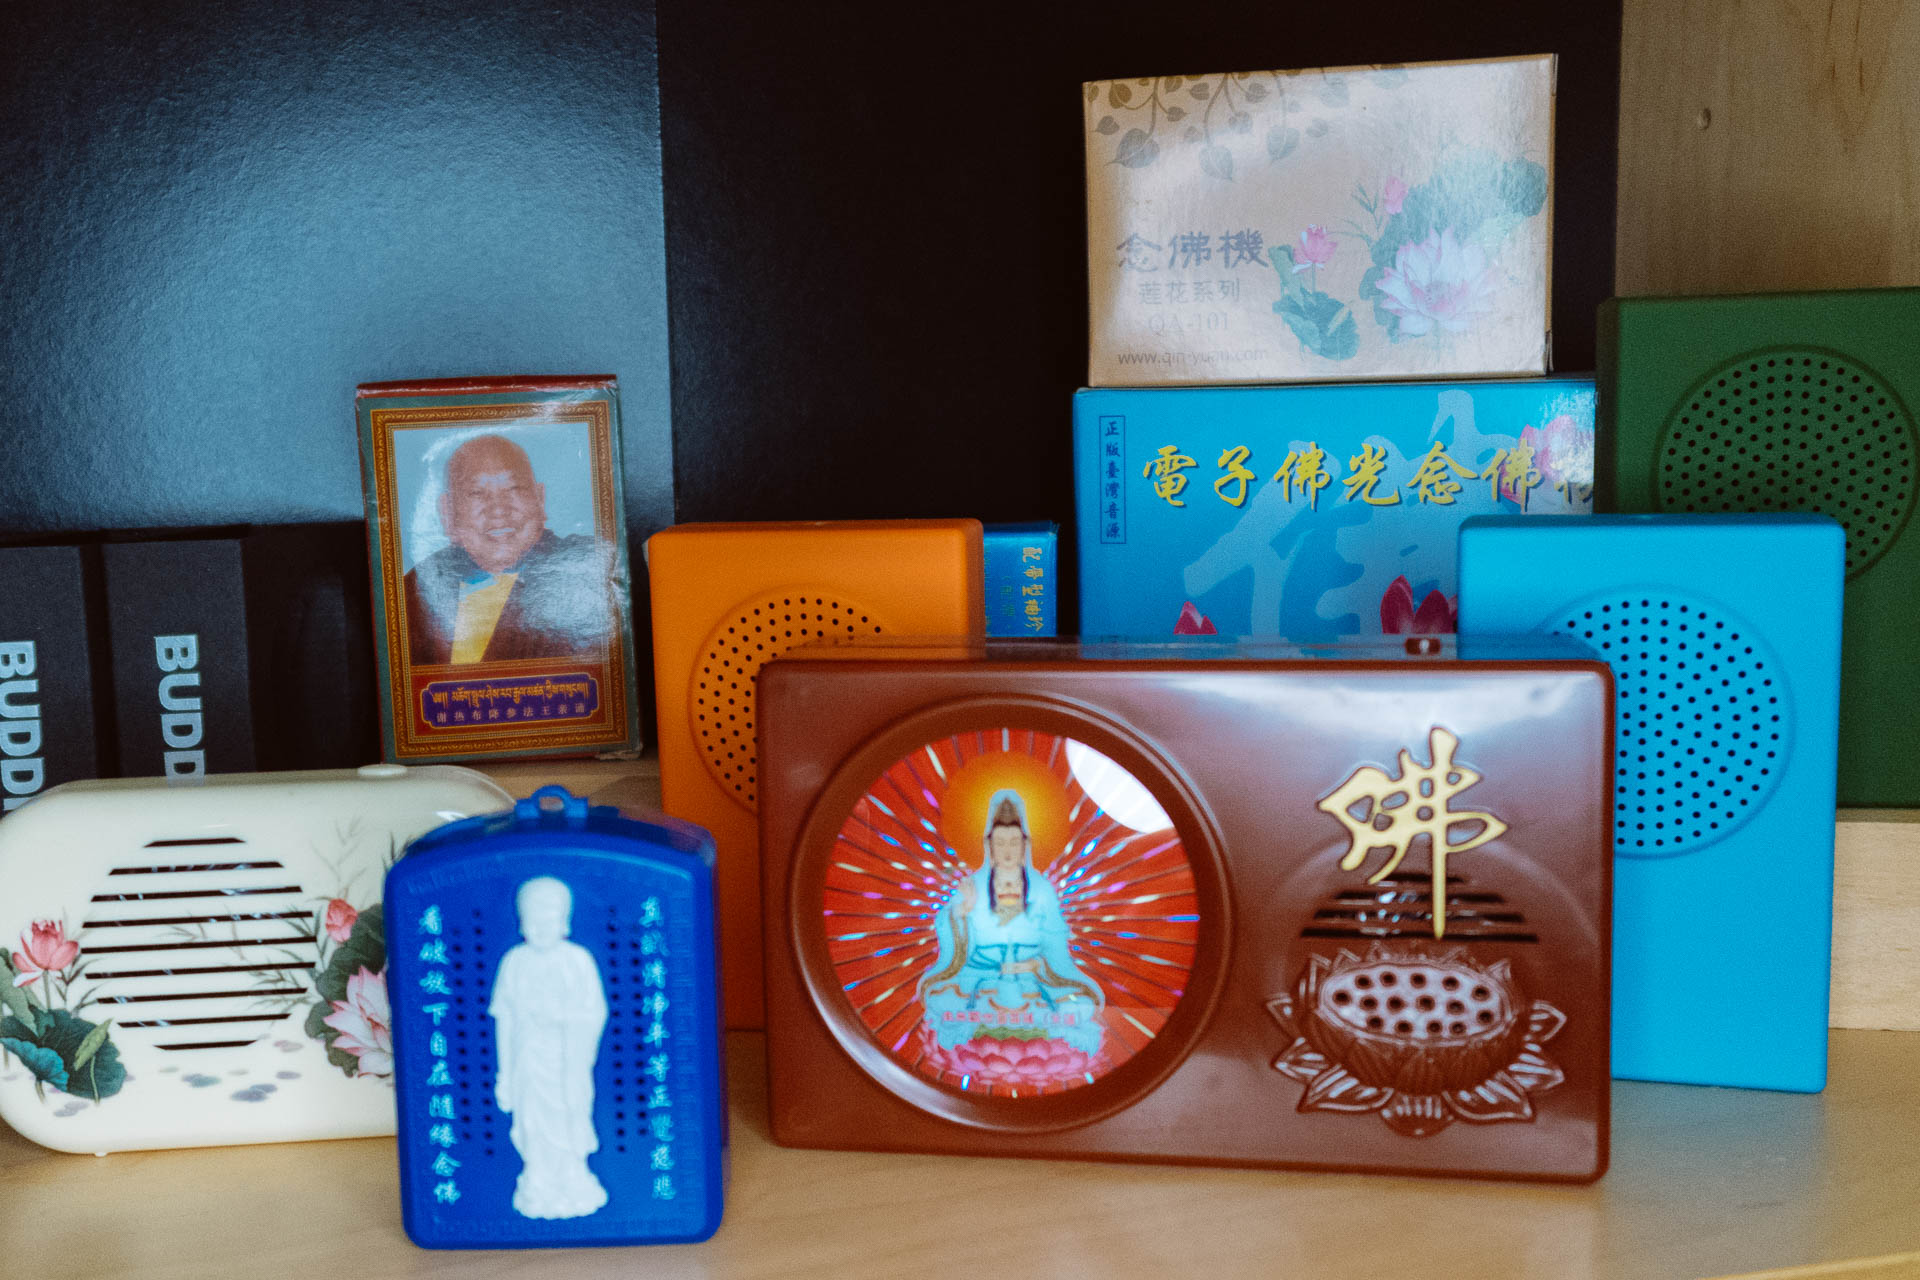 Collection of Buddha Machines and electronic prayer and chant boxes